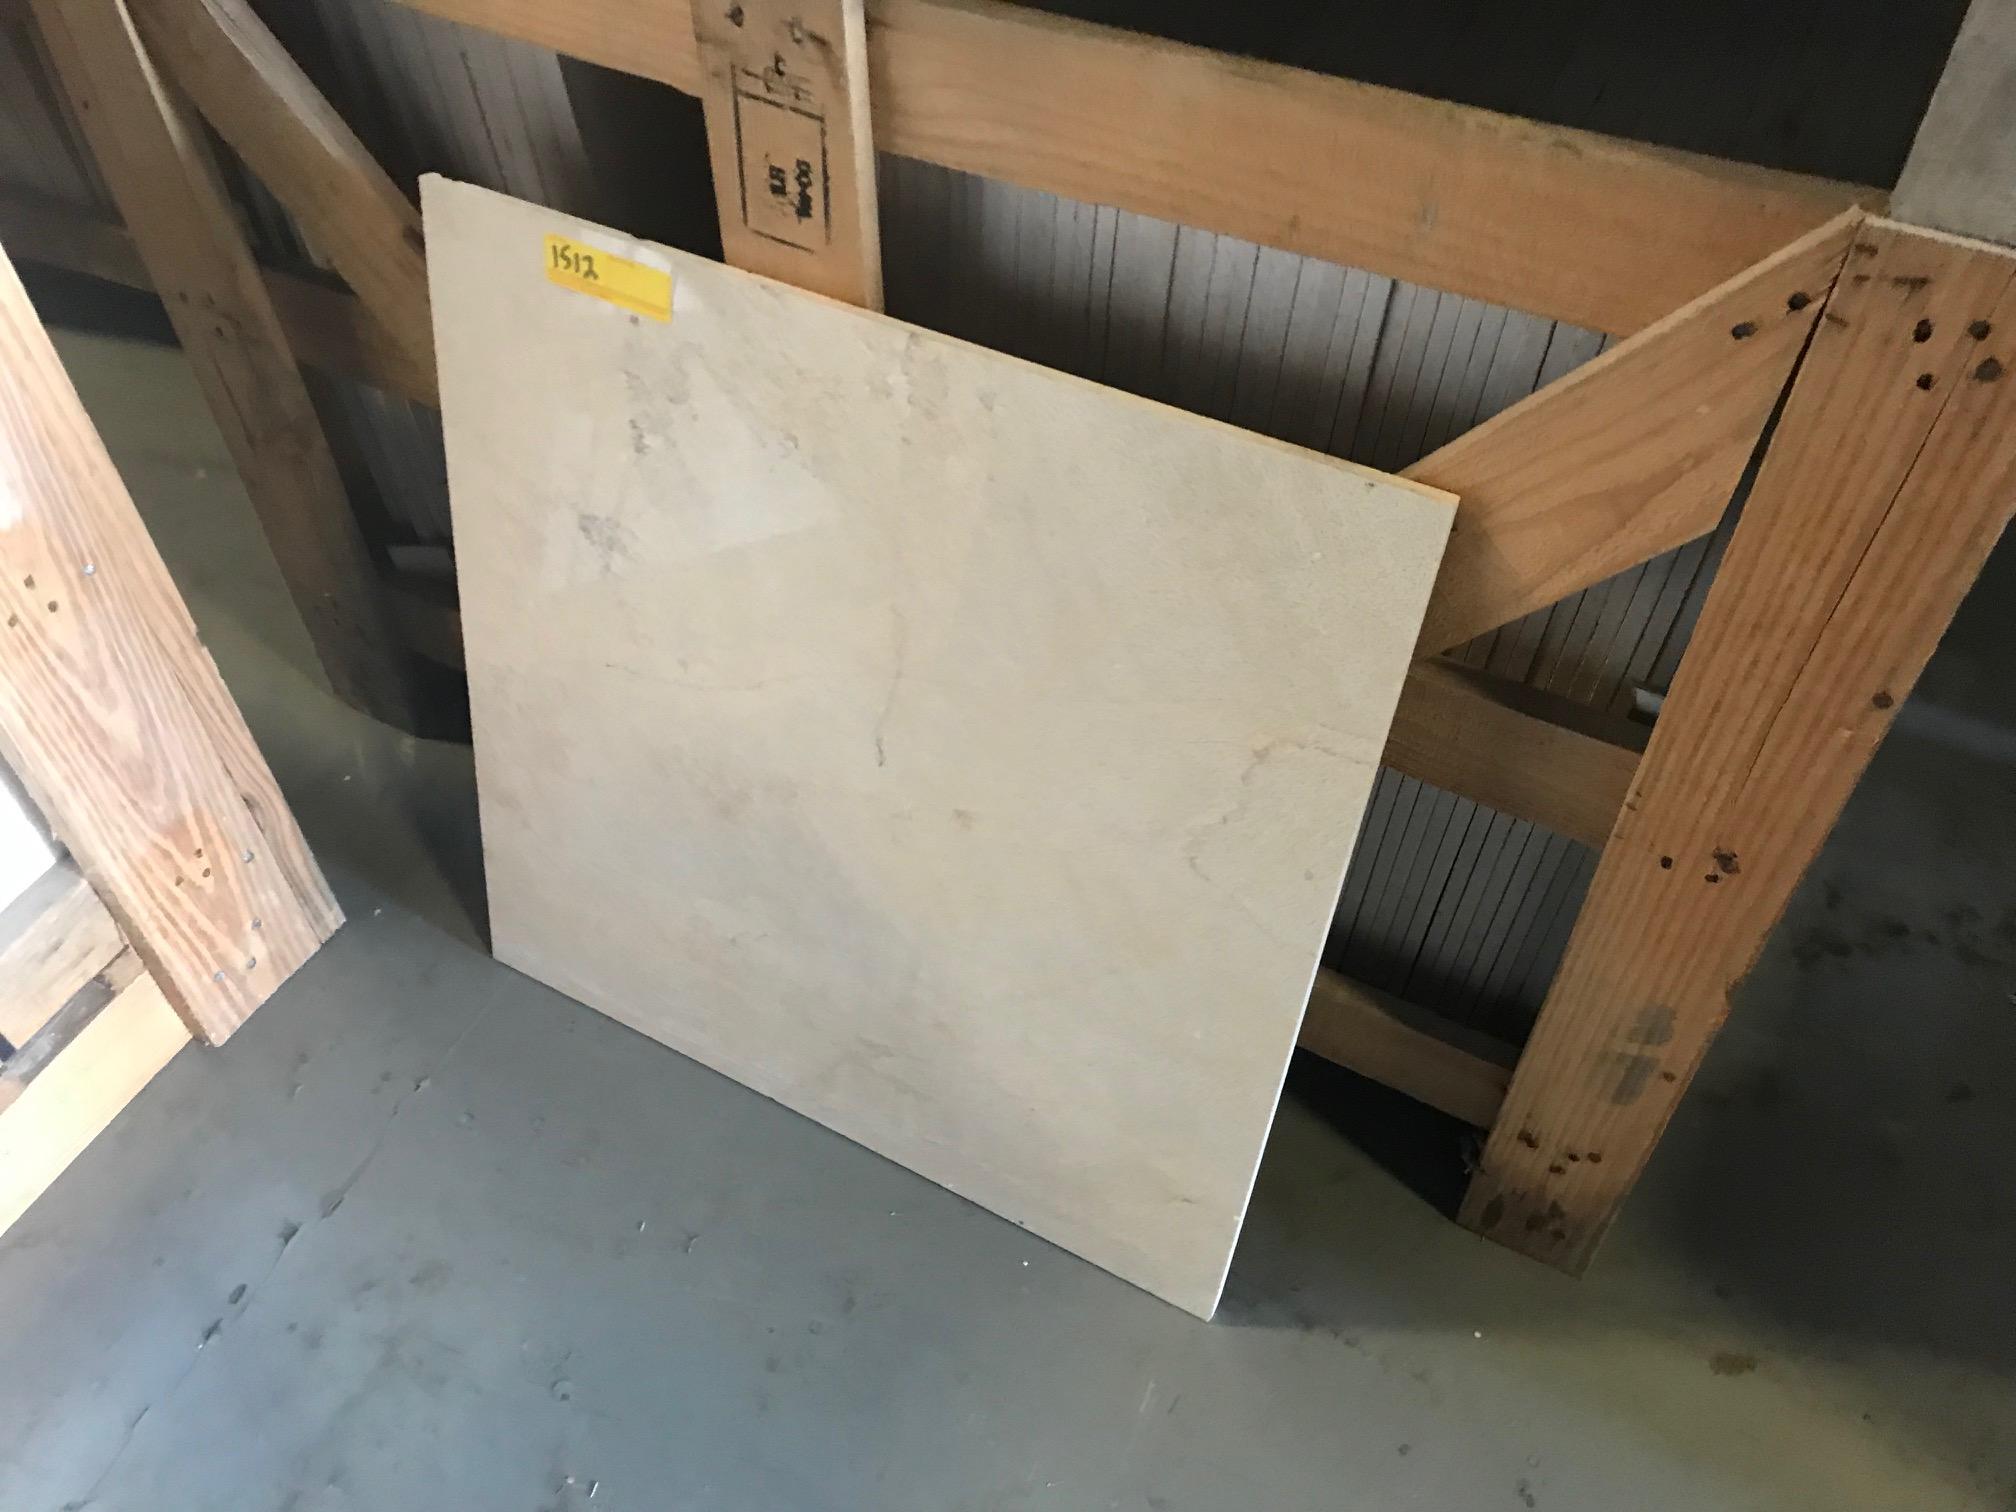 SQ.FT. - POLISHED CROSS CUT MARBLE - 24'' x 24'' x 7/16'' - 80 PIECES / 320 SQ.FT. (CRATE #125)